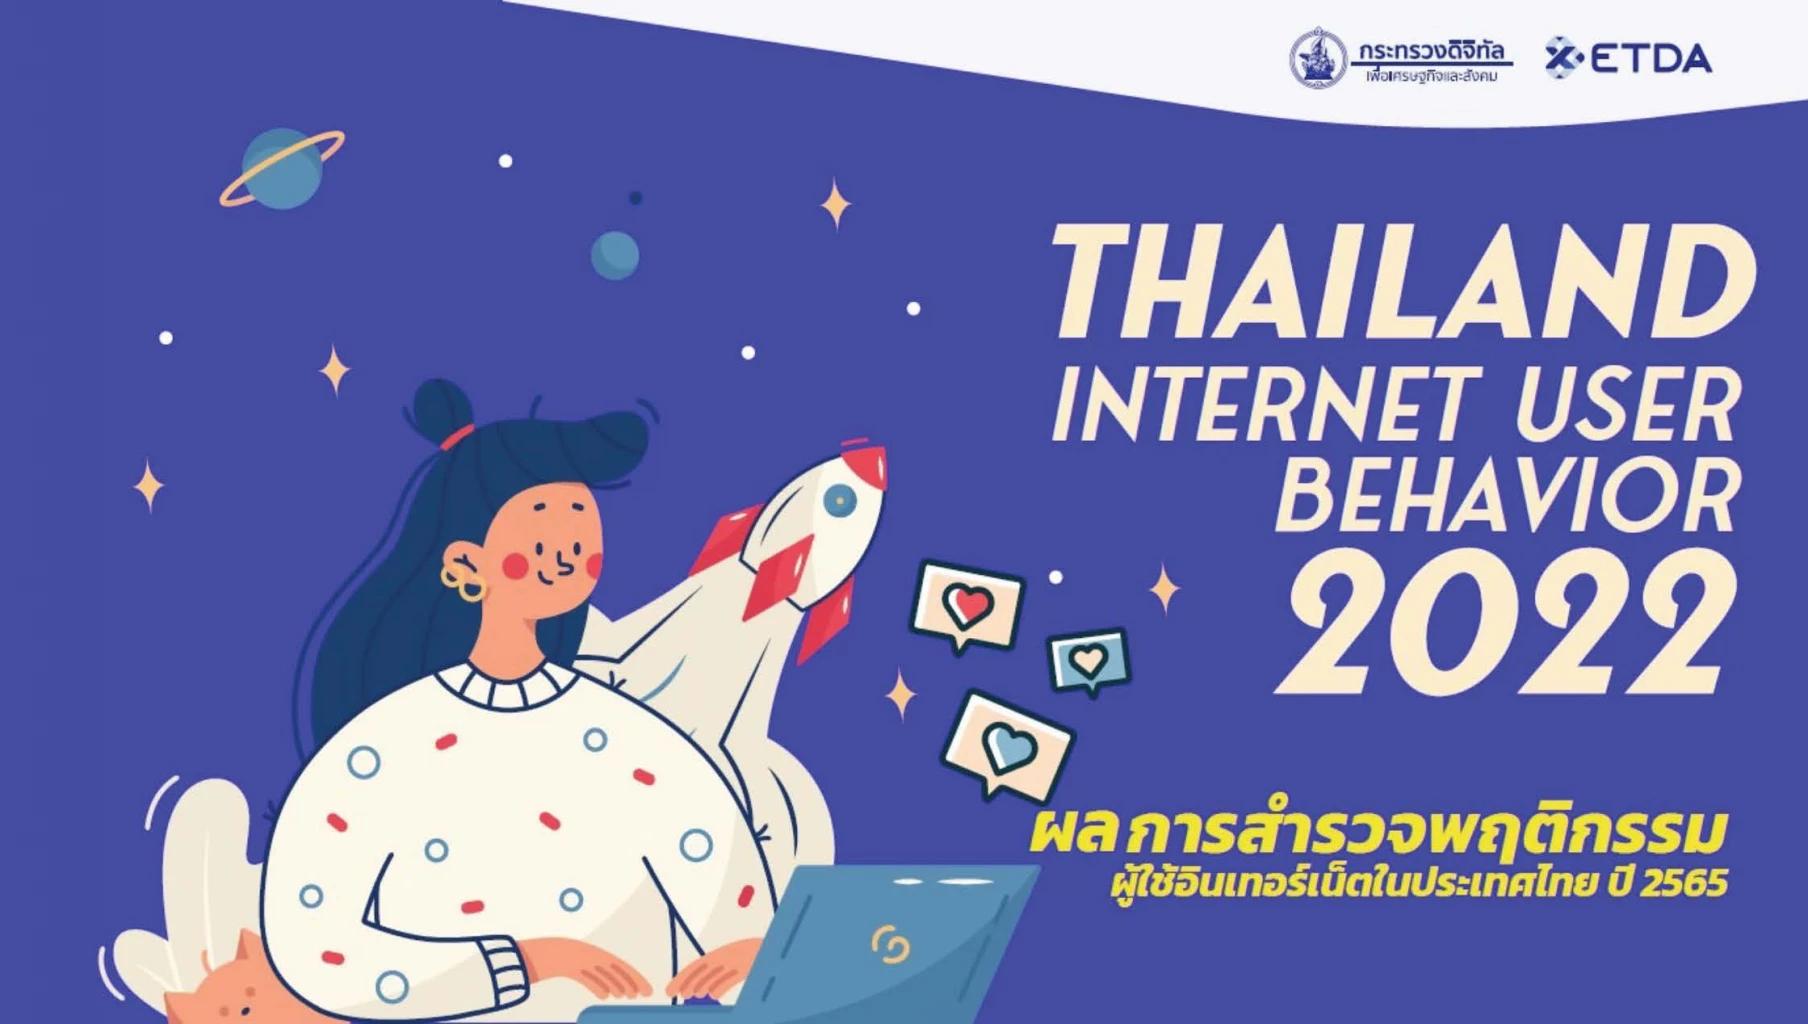 Almost 8 hours a day : Thai Gen Y is now the biggest net users.